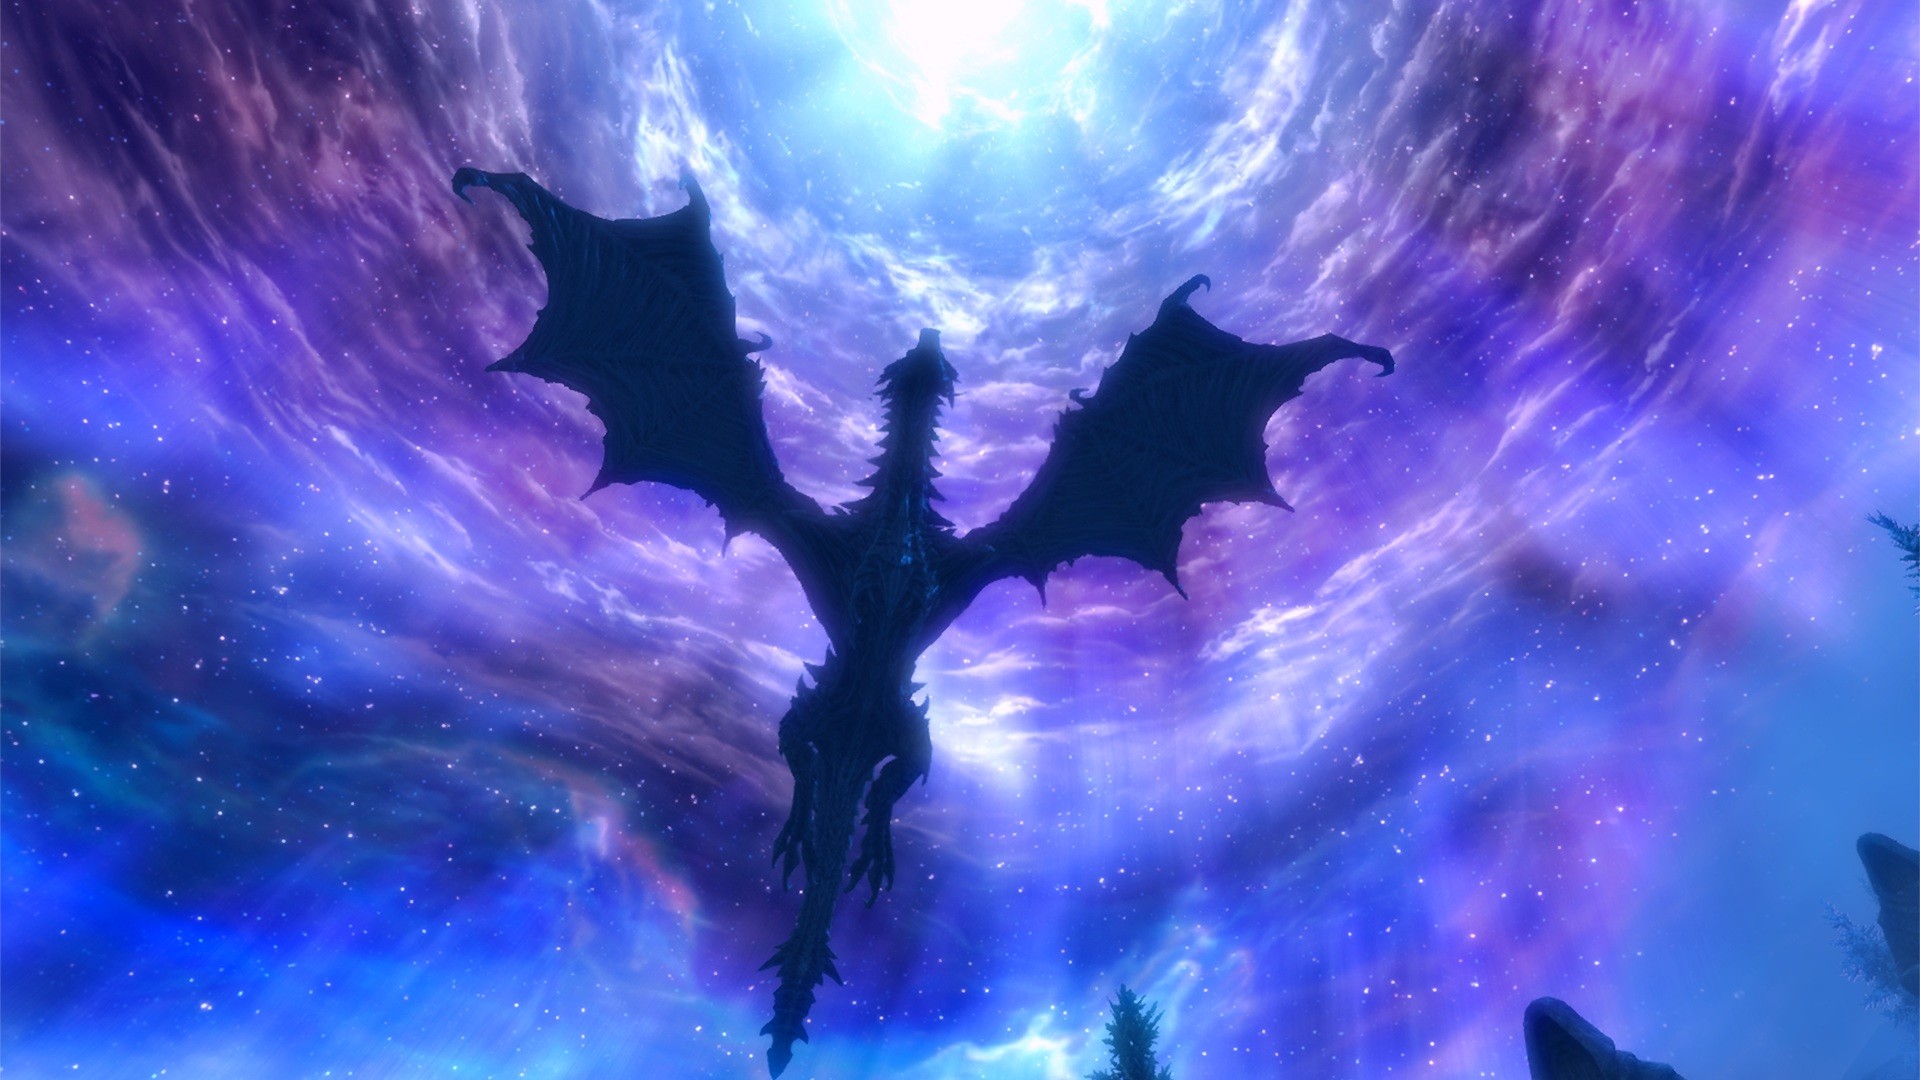 1920x1080 Dragon in the sky from the game The Elder Scrolls, Skyrim